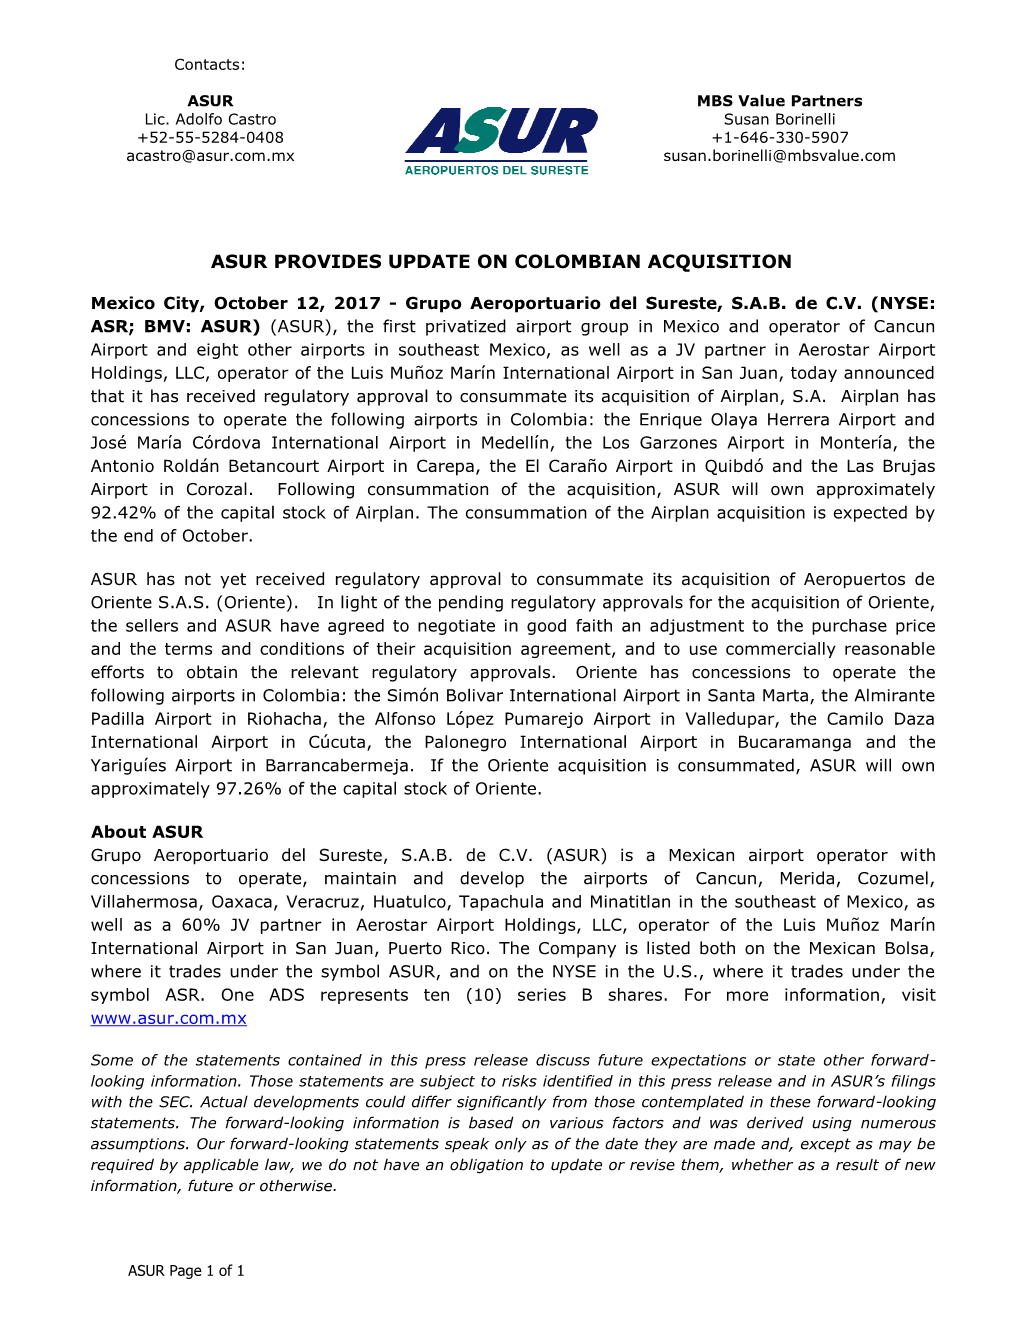 Asur Provides Update on Colombian Acquisition